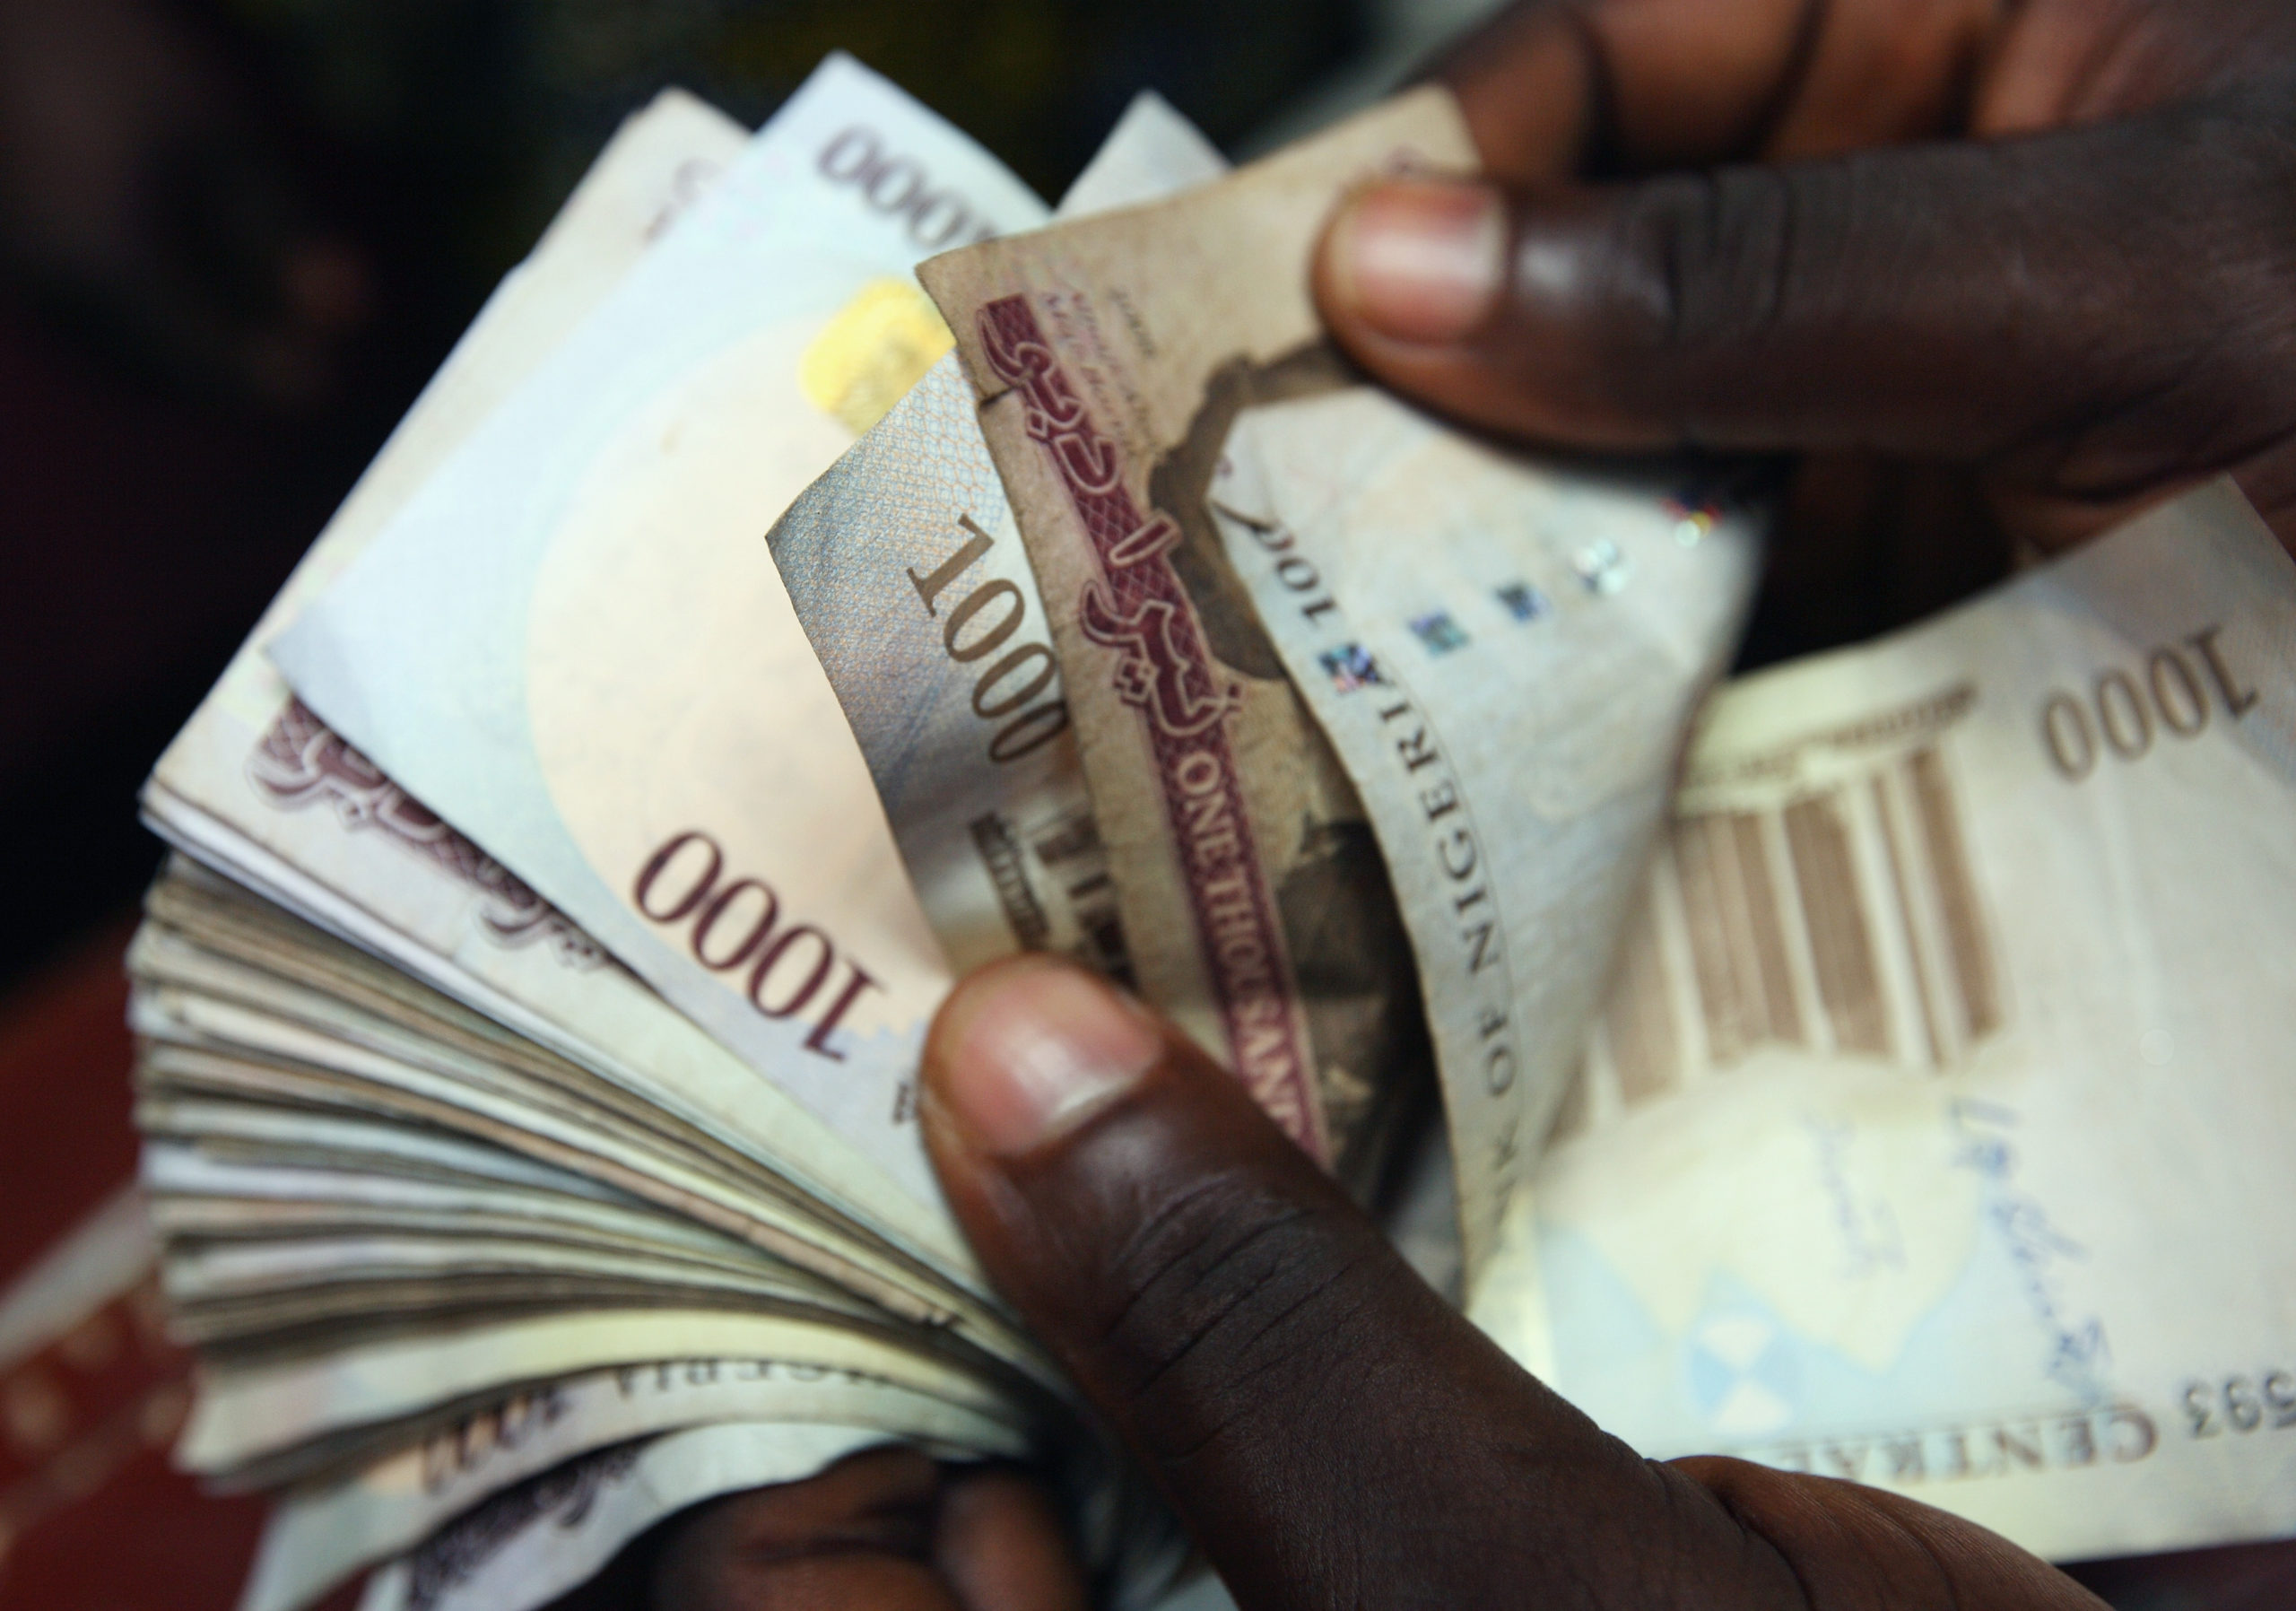 LAGOS, NIGERIA - JULY 15:  A detail of some Nigerian Naira,(NGN) being counted  in an exchange office on July 15, 2008 in Lagos, Nigeria.  (Photo by Dan Kitwood/Getty Images)